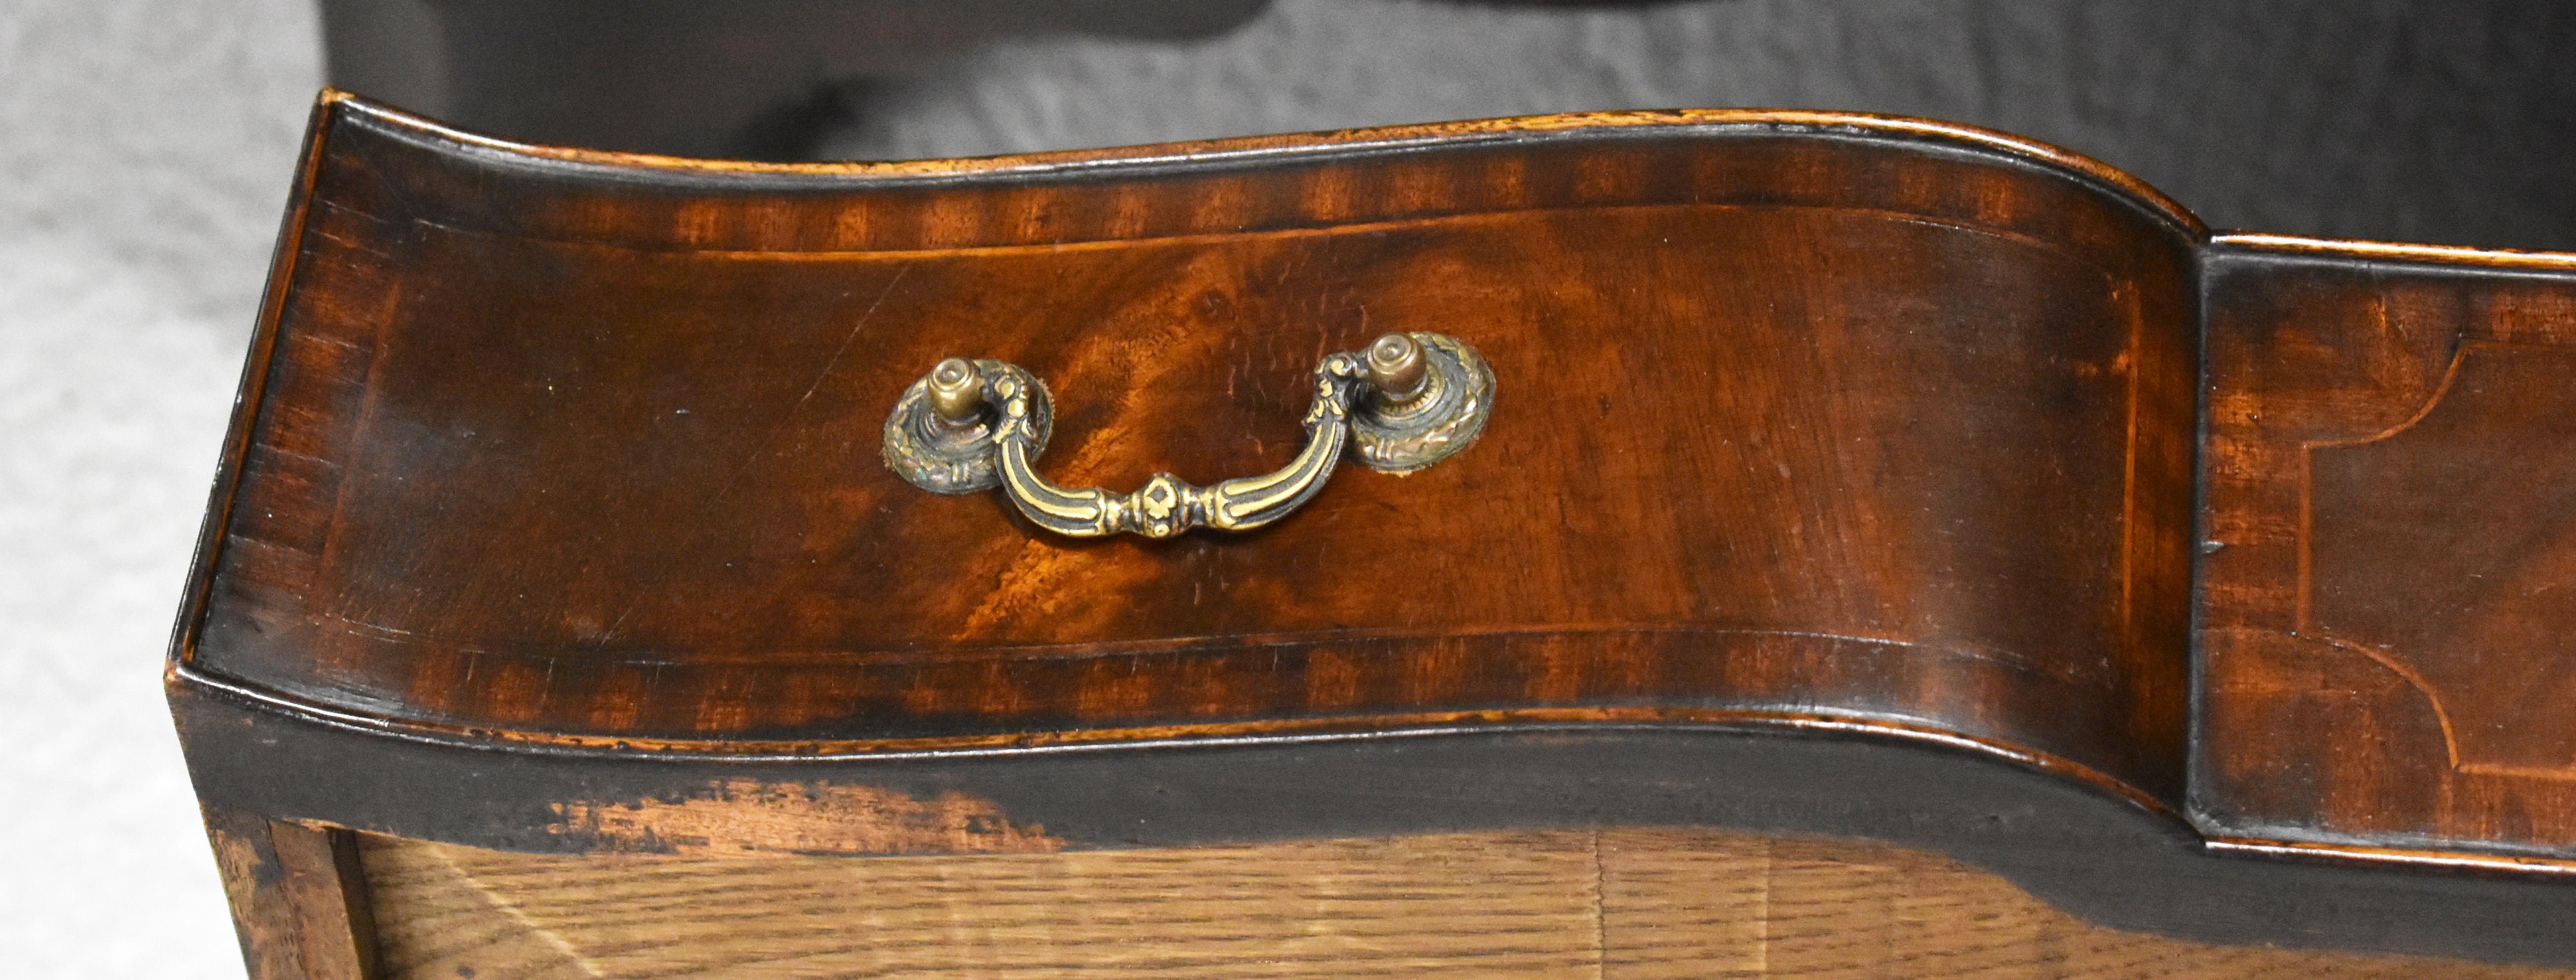 20th Century English Antique Edwardian Flame Mahogany Serpentine Chest For Sale 3